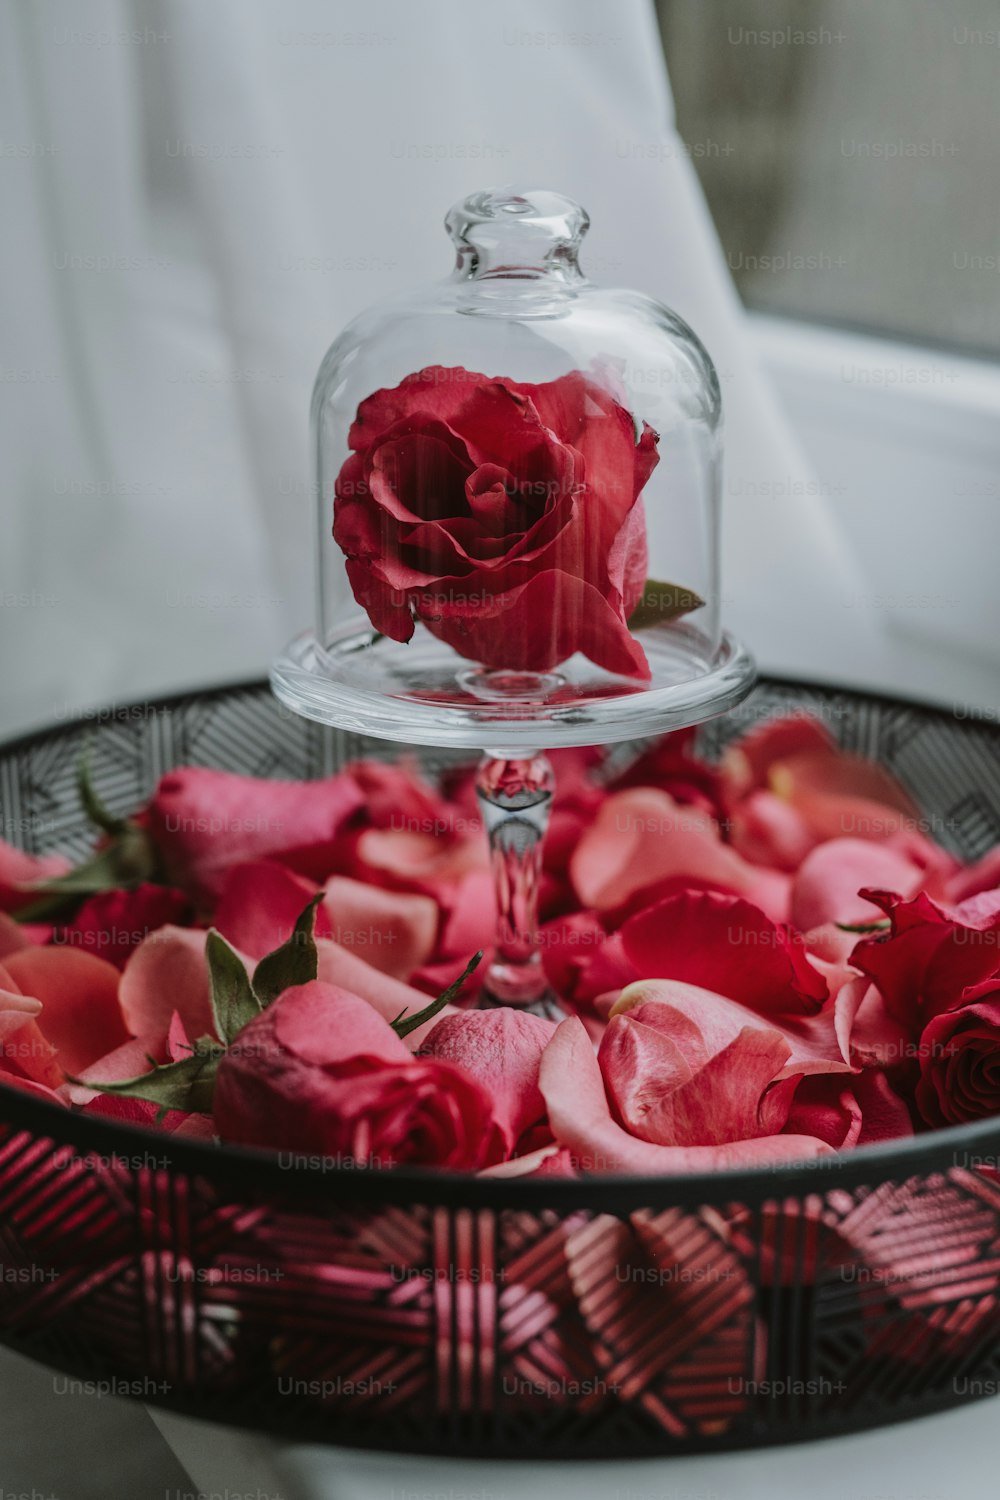 a glass clochel with a red rose in it